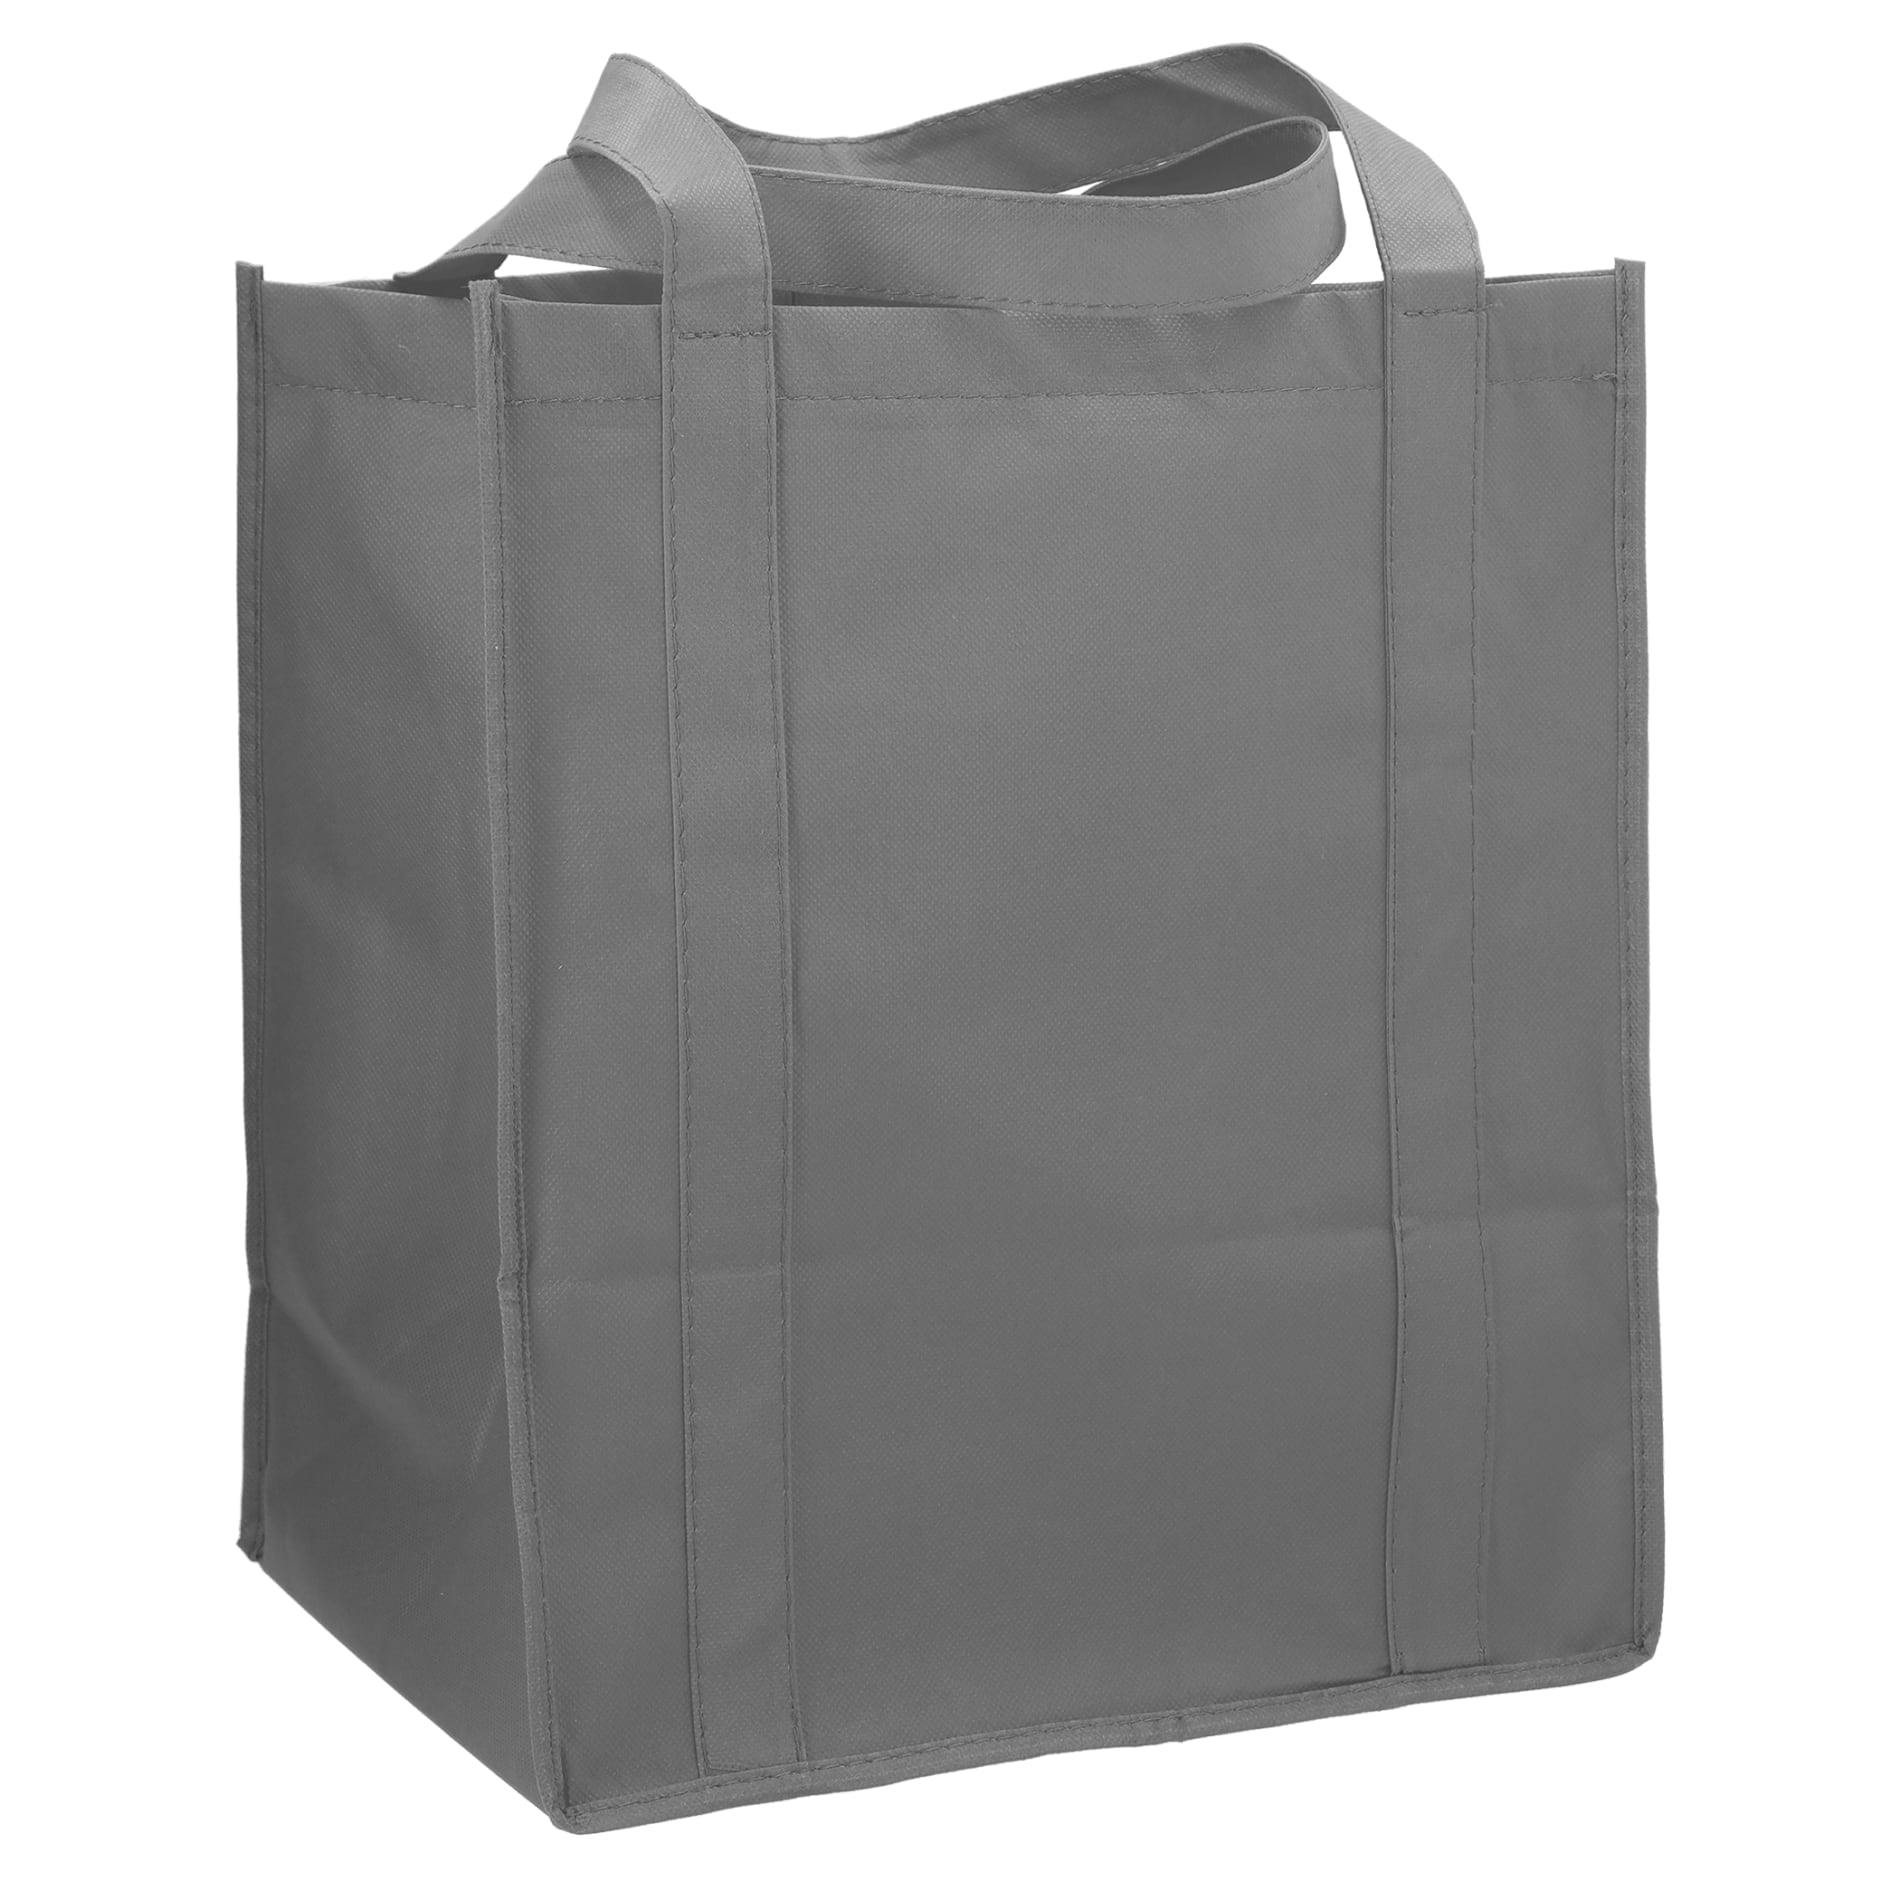 Little Juno Non-Woven Grocery Tote - additional Image 2